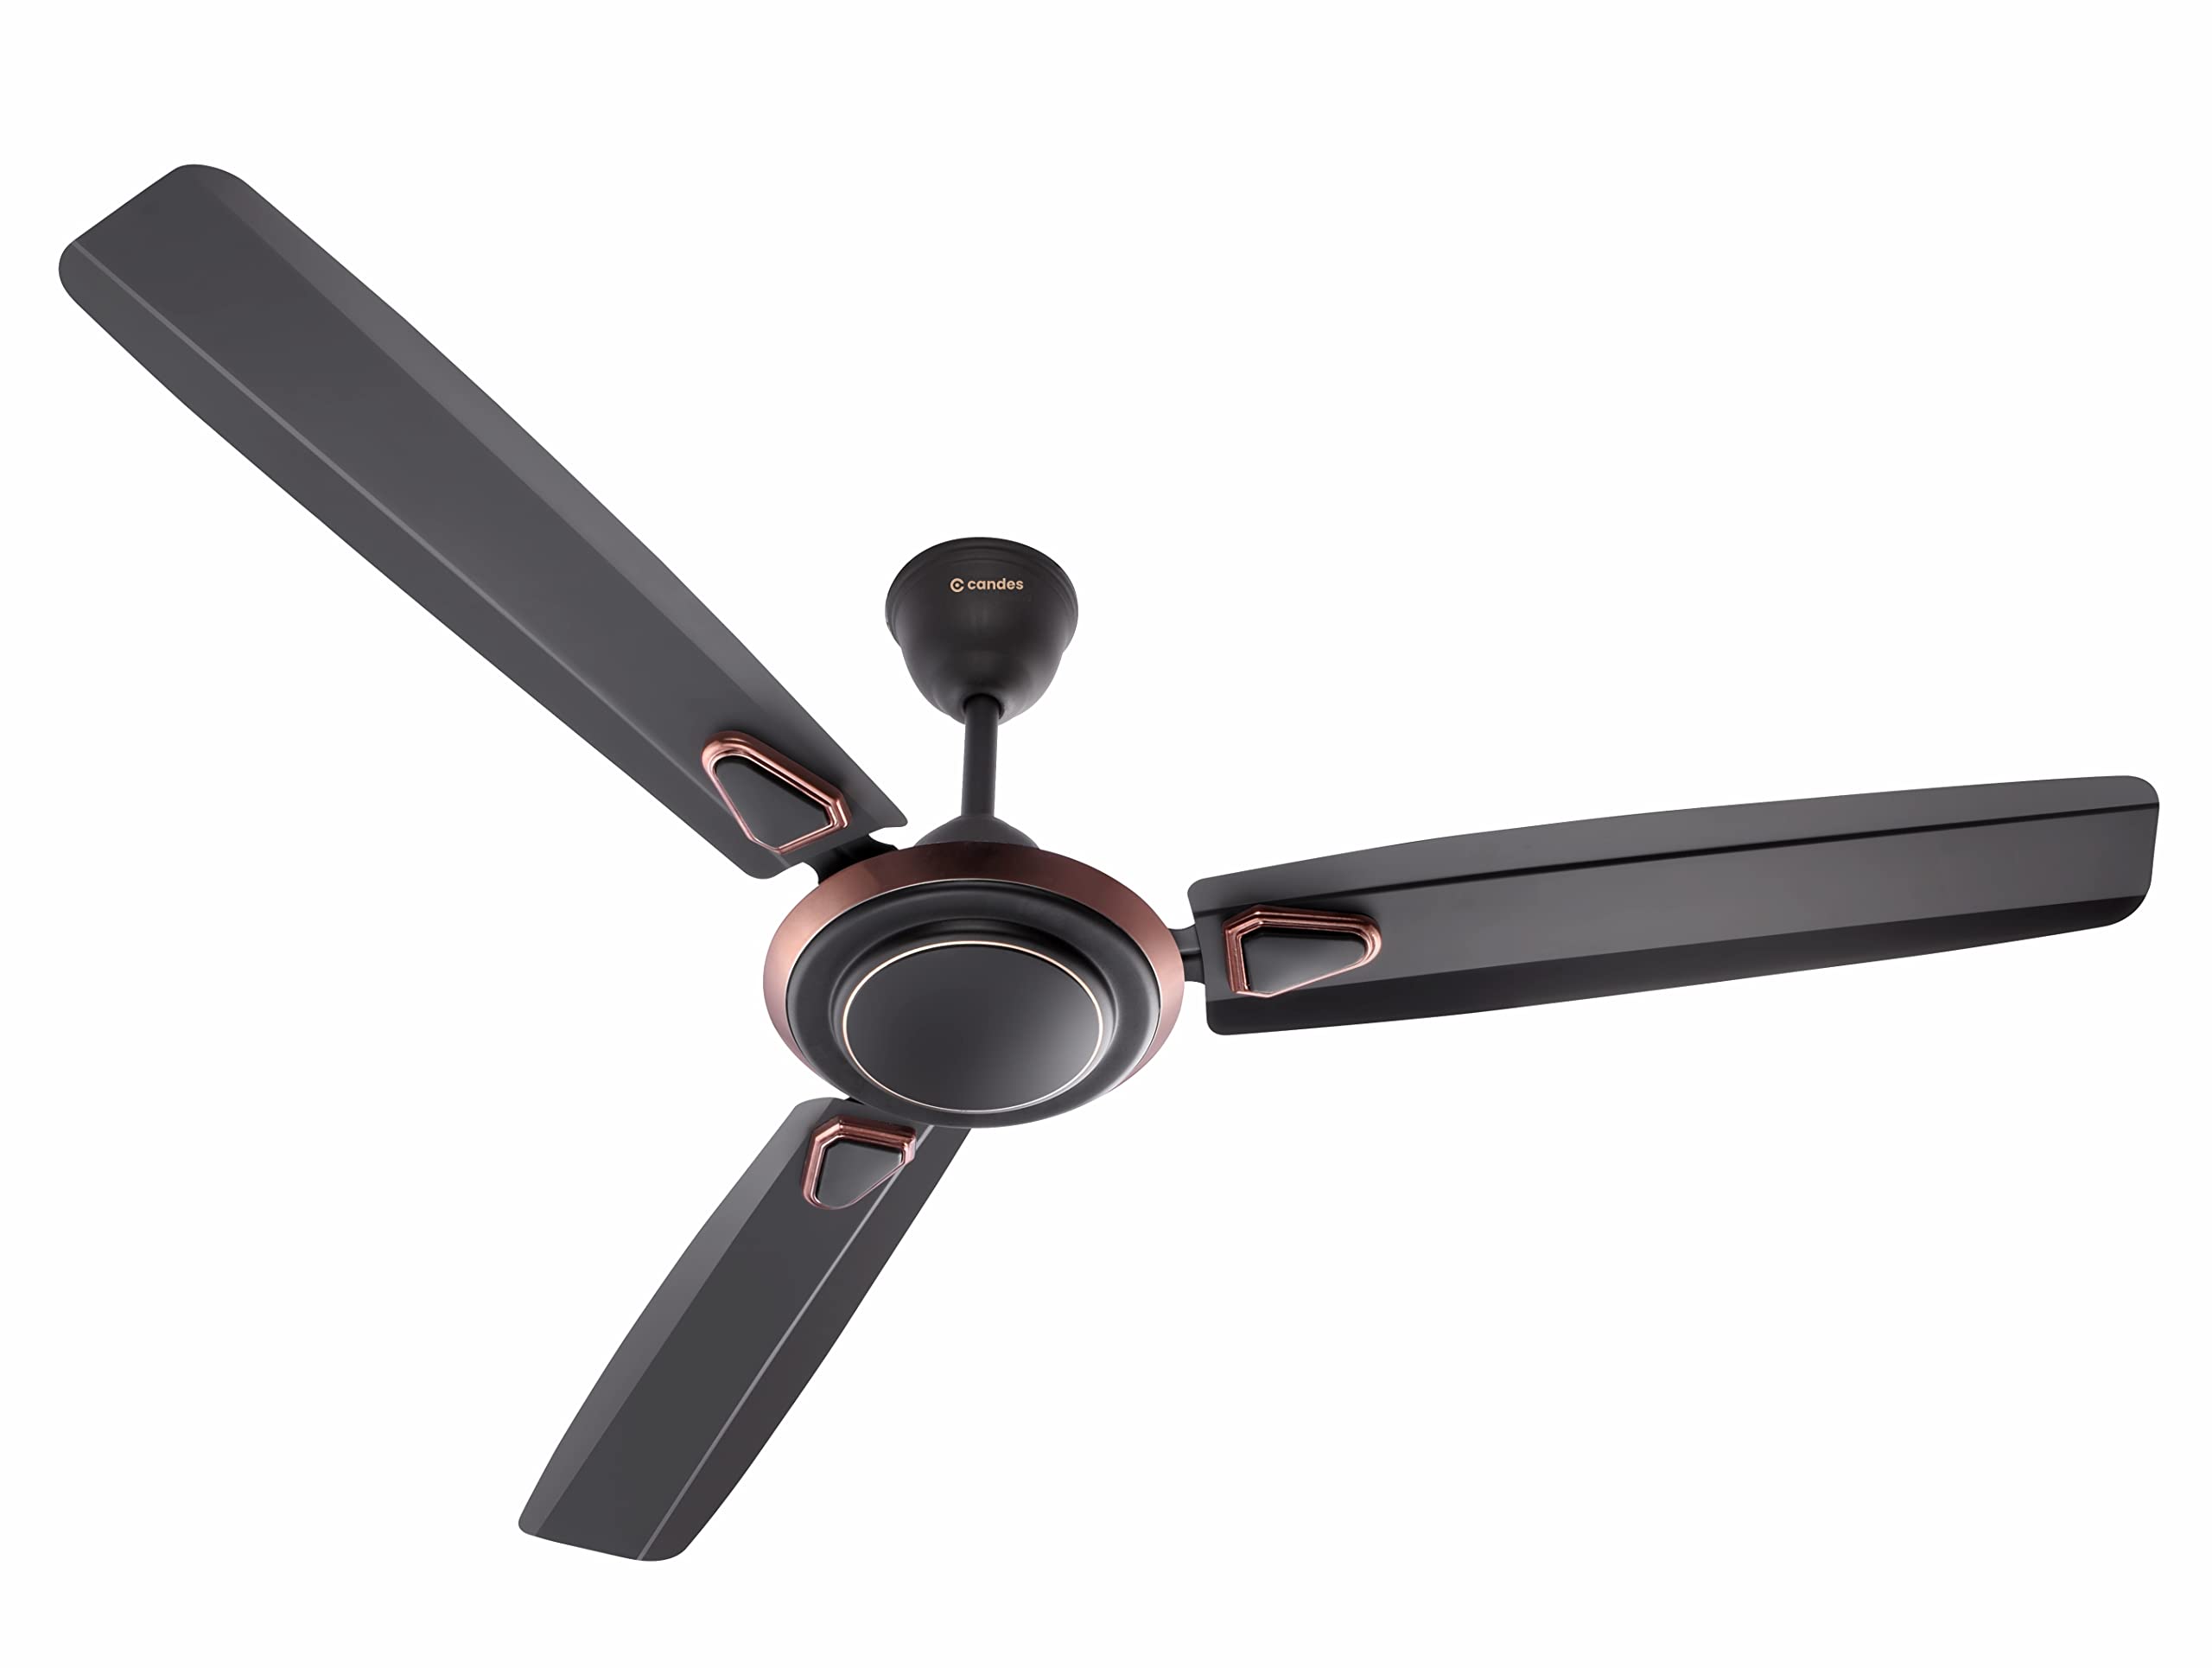 Candes Breeza 1200mm/48 inch High Speed Anti dust Decorative 5 Star Rated Ceiling Fan 400 RPM with 2 Yrs Warranty (Pack of 1,Coffee Brown) (Coffee Brown, Pack of 1)